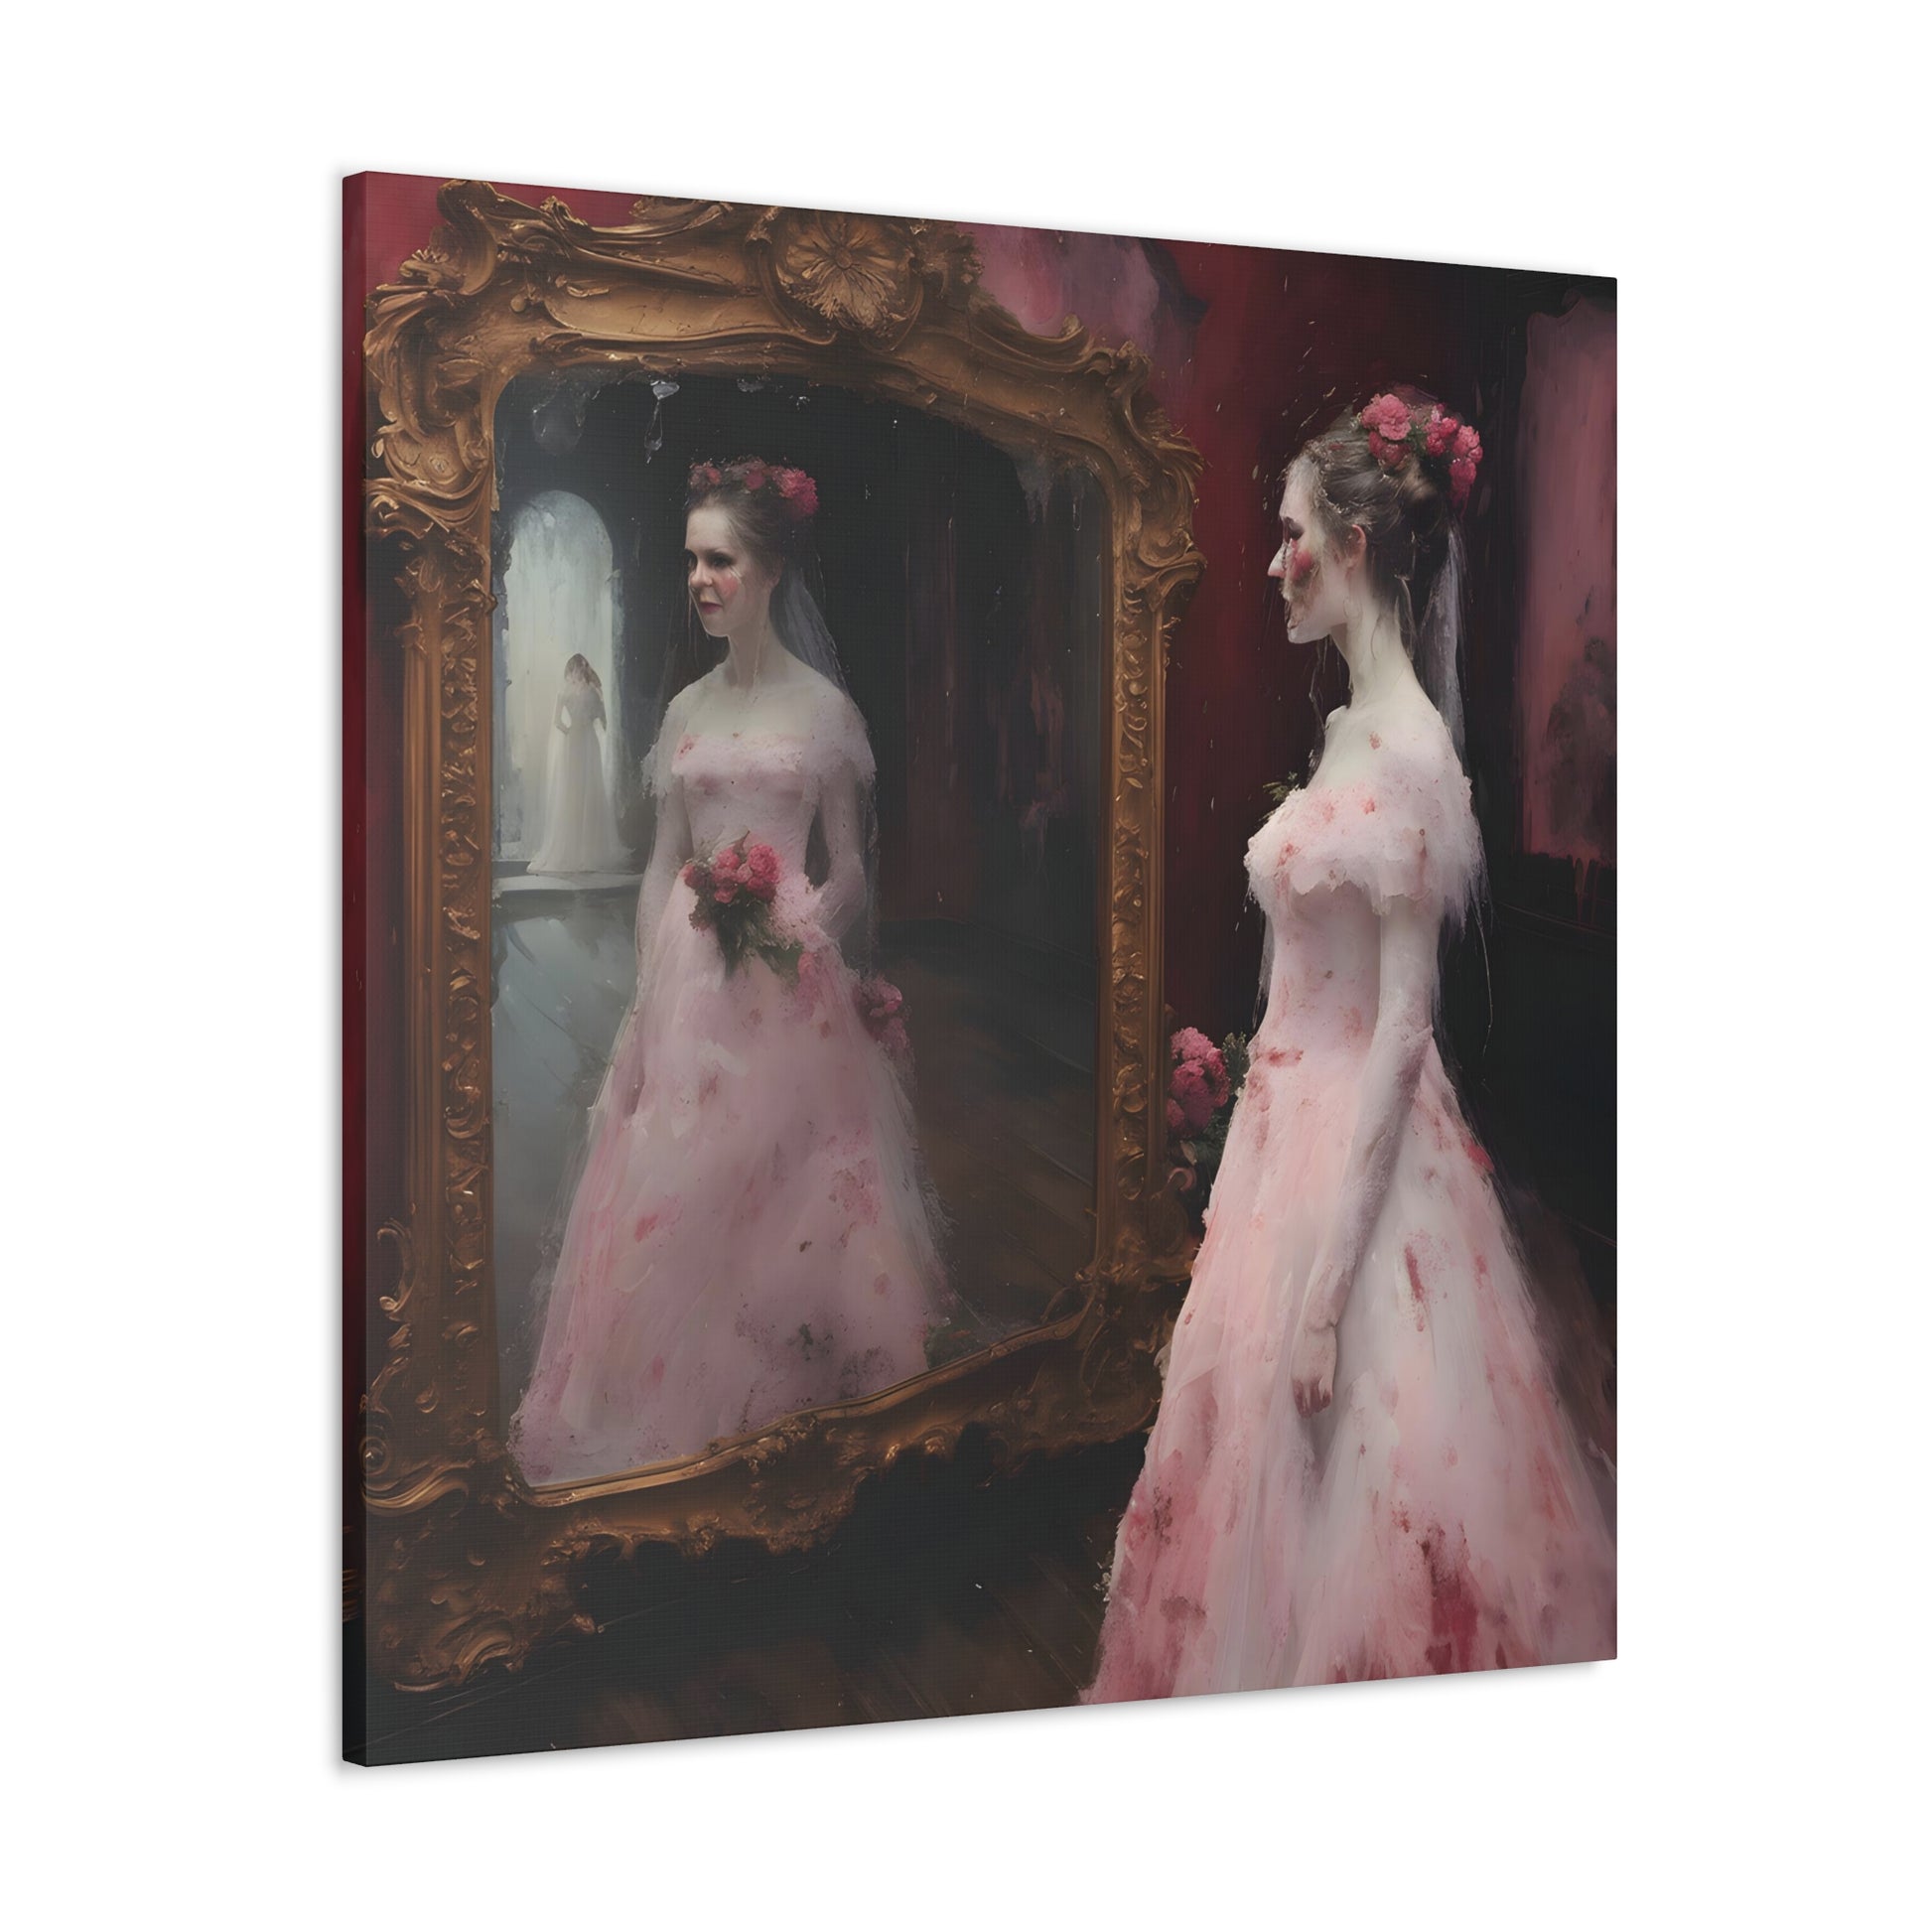 angled pic Reflections of a Timeless Moment' painting captures a bride in a vintage pink gown, reflecting in a grandiose mirror in a Victorian dressing room. The artwork contrasts the opulent gold frame with the room's dark tones, highlighting her delicate dress and tender expression, symbolizing personal reflection and quiet joy before a life-changing event